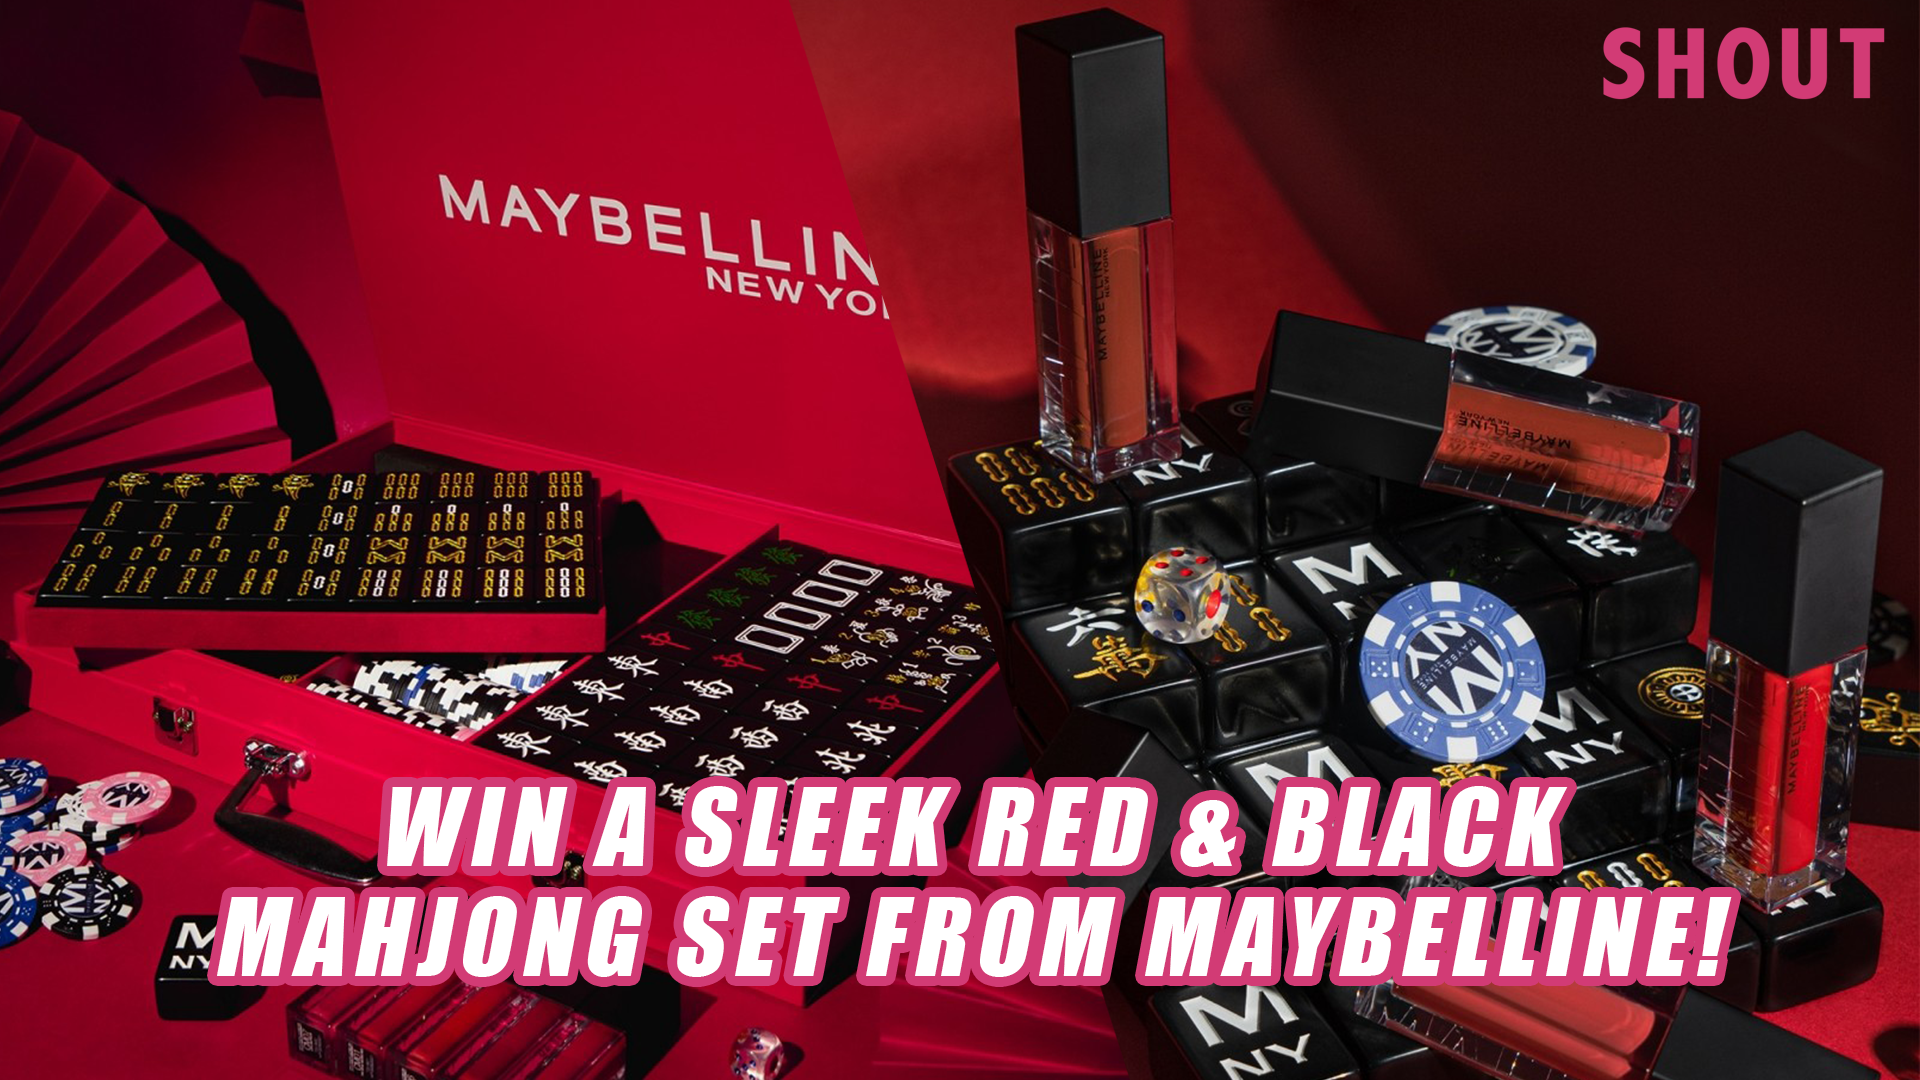 MAYBELLINE'S EXCLUSIVE FIERY RED, BLACK & GOLD MAHJONG SET - Shout